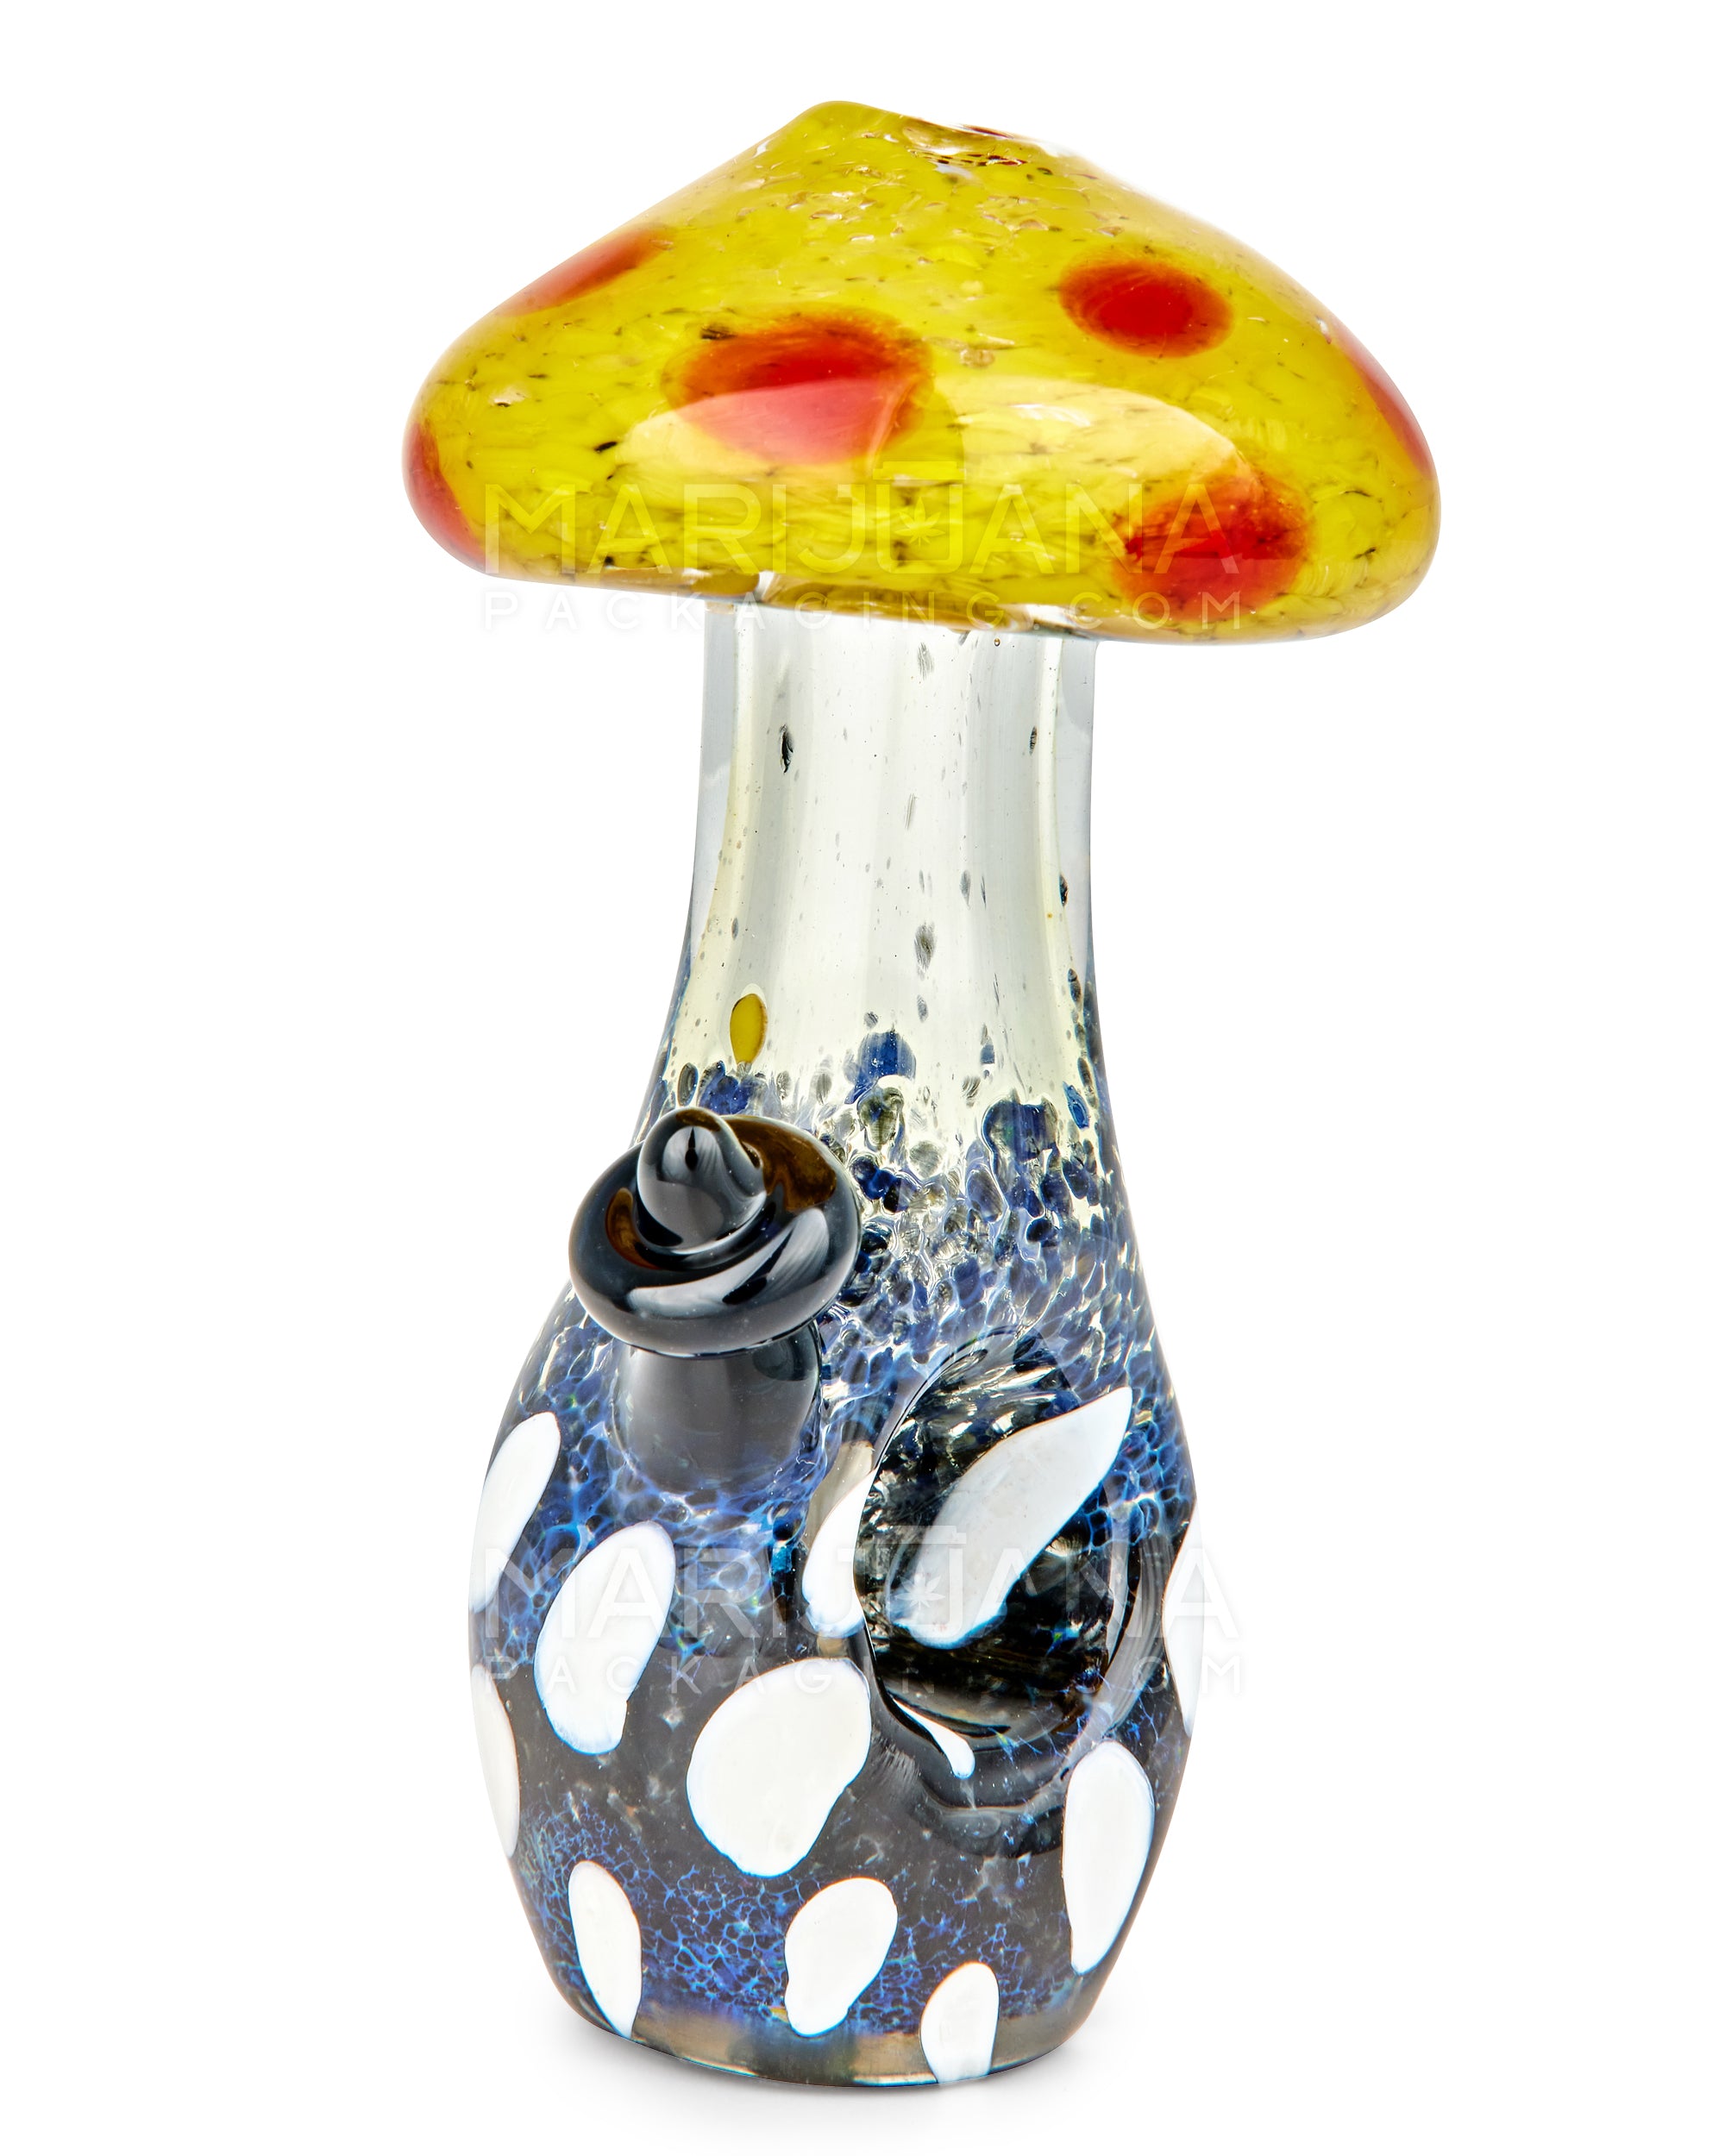 Frit & Multi Fumed Mushroom Hand Pipe w/ Ribboning & Glass Handle | 4in Long - Glass - Gold - 6